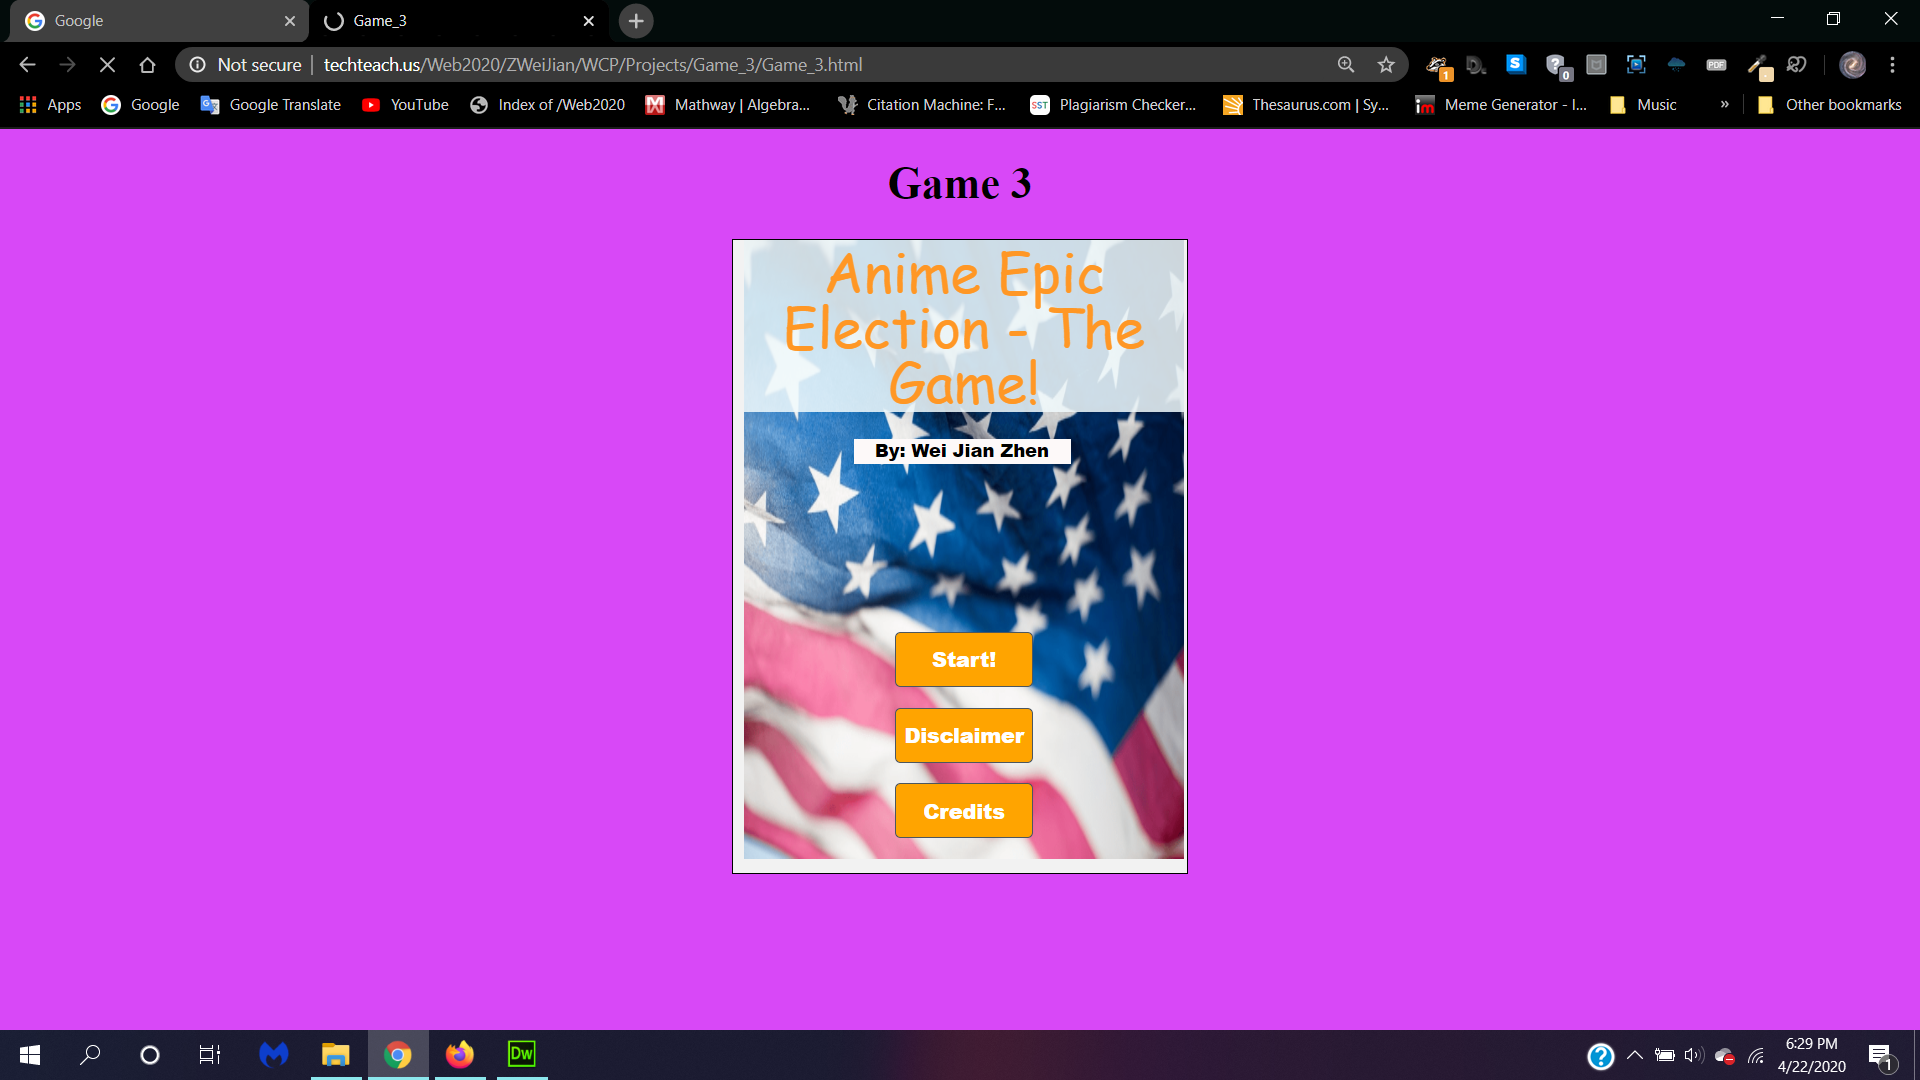 Screenshot of Game 3/Anime Election - The Game and its website